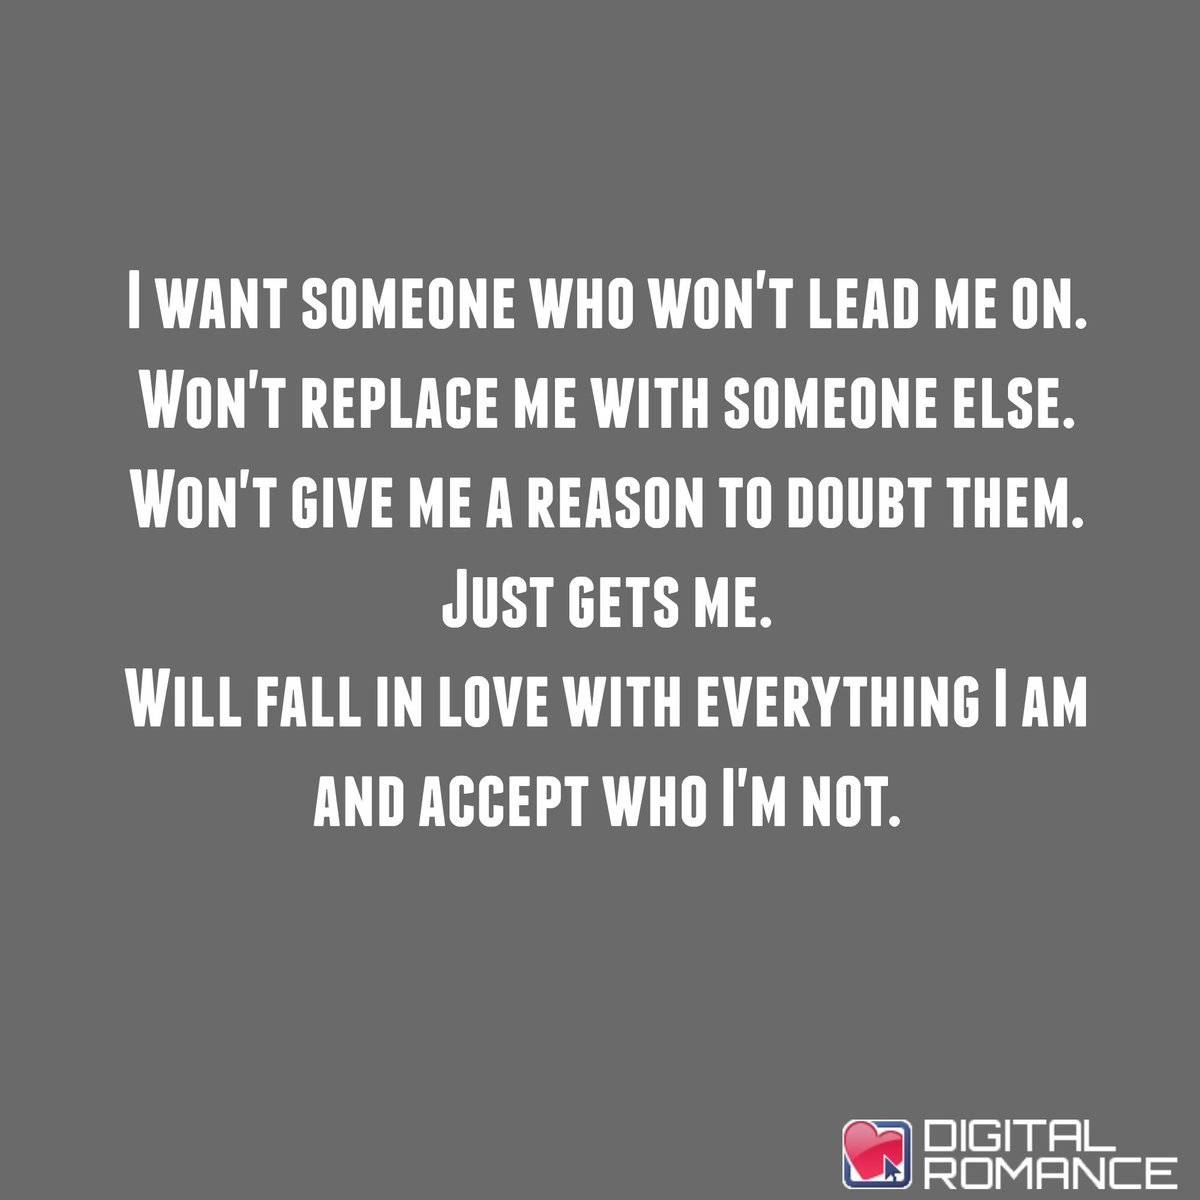 Digital Romance Inc on Twitter "I want someone who won t lead me on Won t replace me with someone else Won t give me a relationships quotes